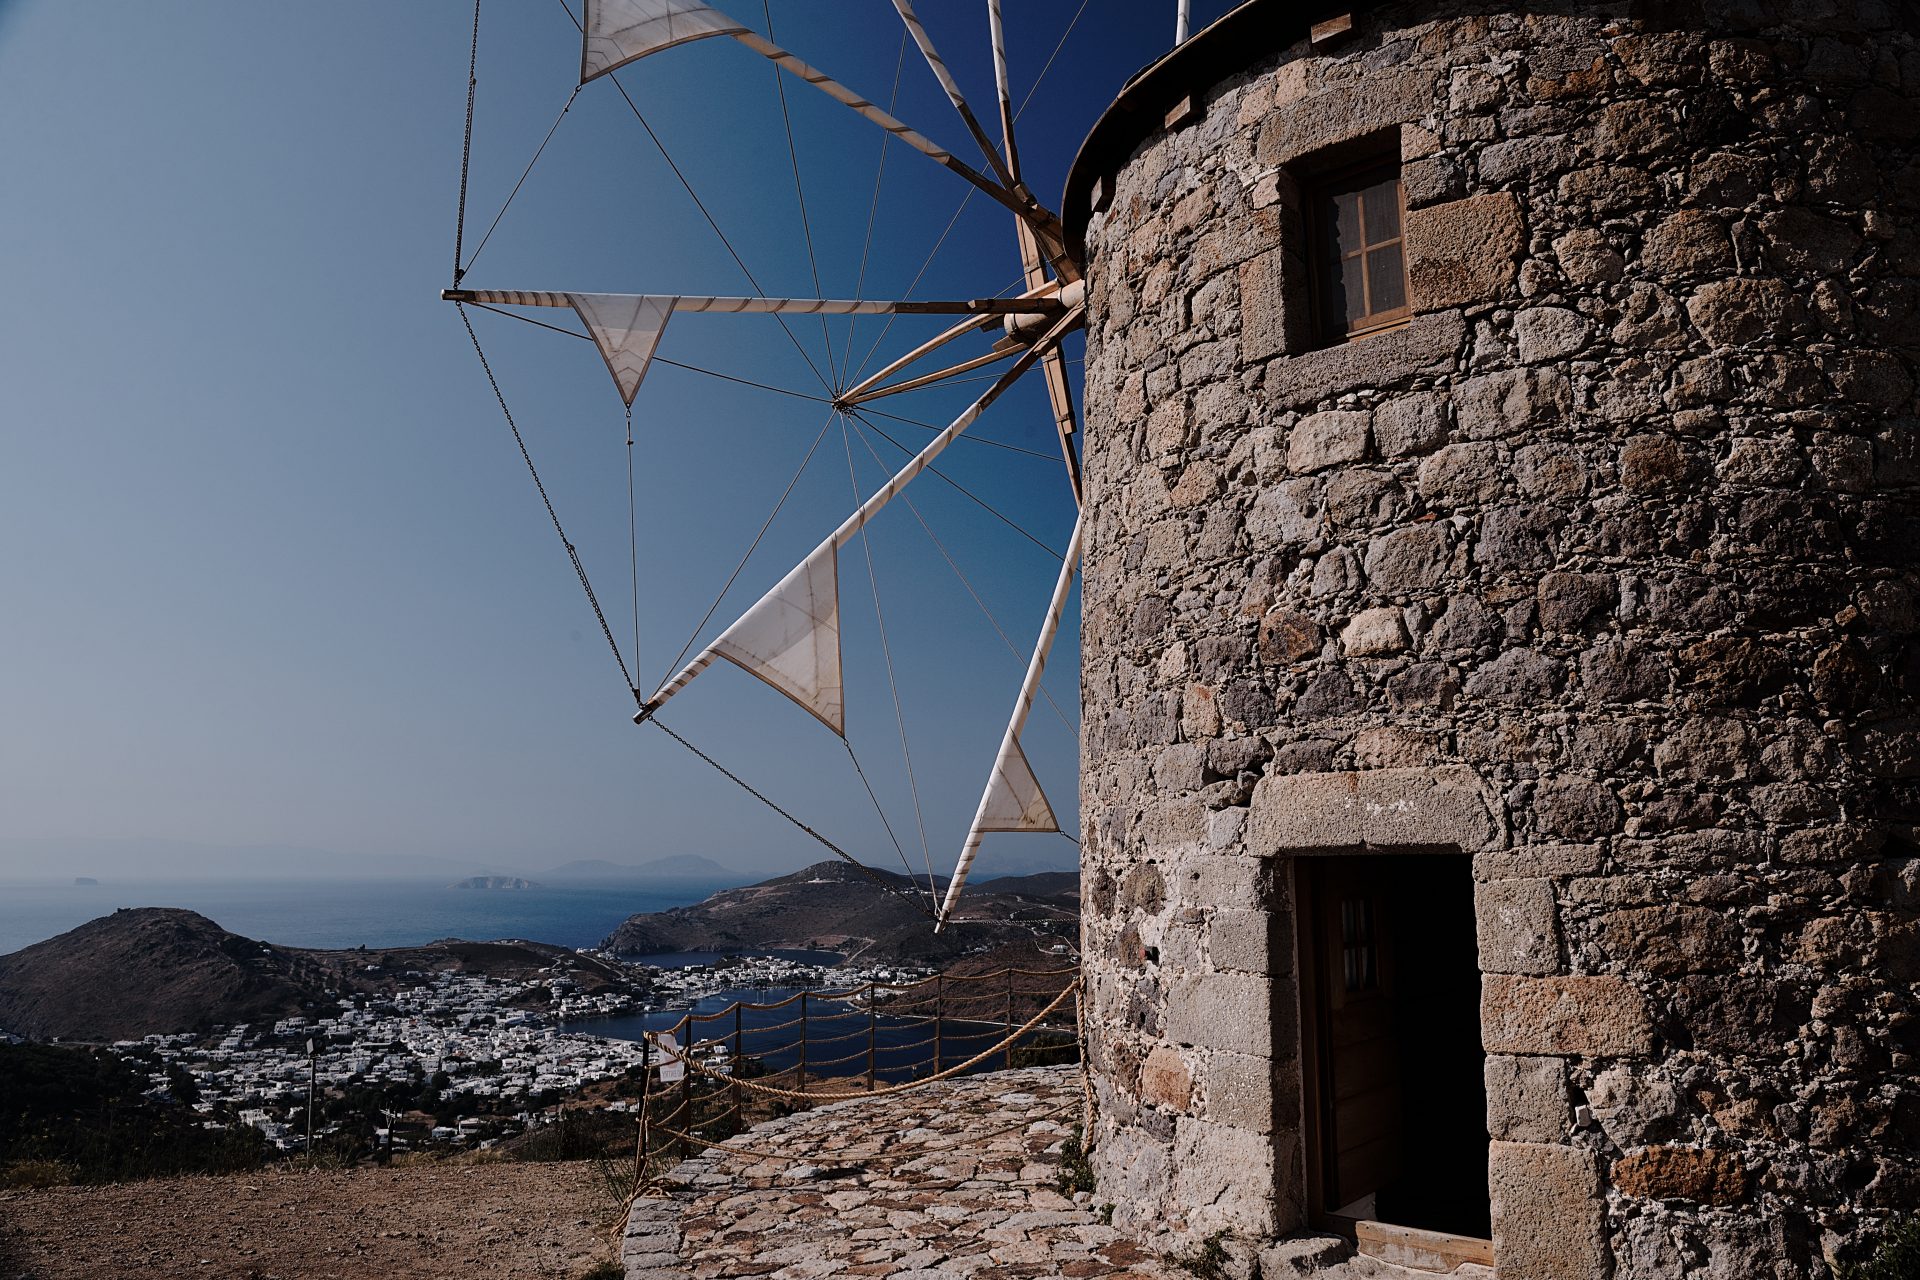 <p>The most beautiful of the Greek islands? Even better than Santorini or Miconos? It is difficult to make such a resounding judgment. But Patmos, just a few miles from the Turkish coast, has an authenticity that other islands have lost.</p>